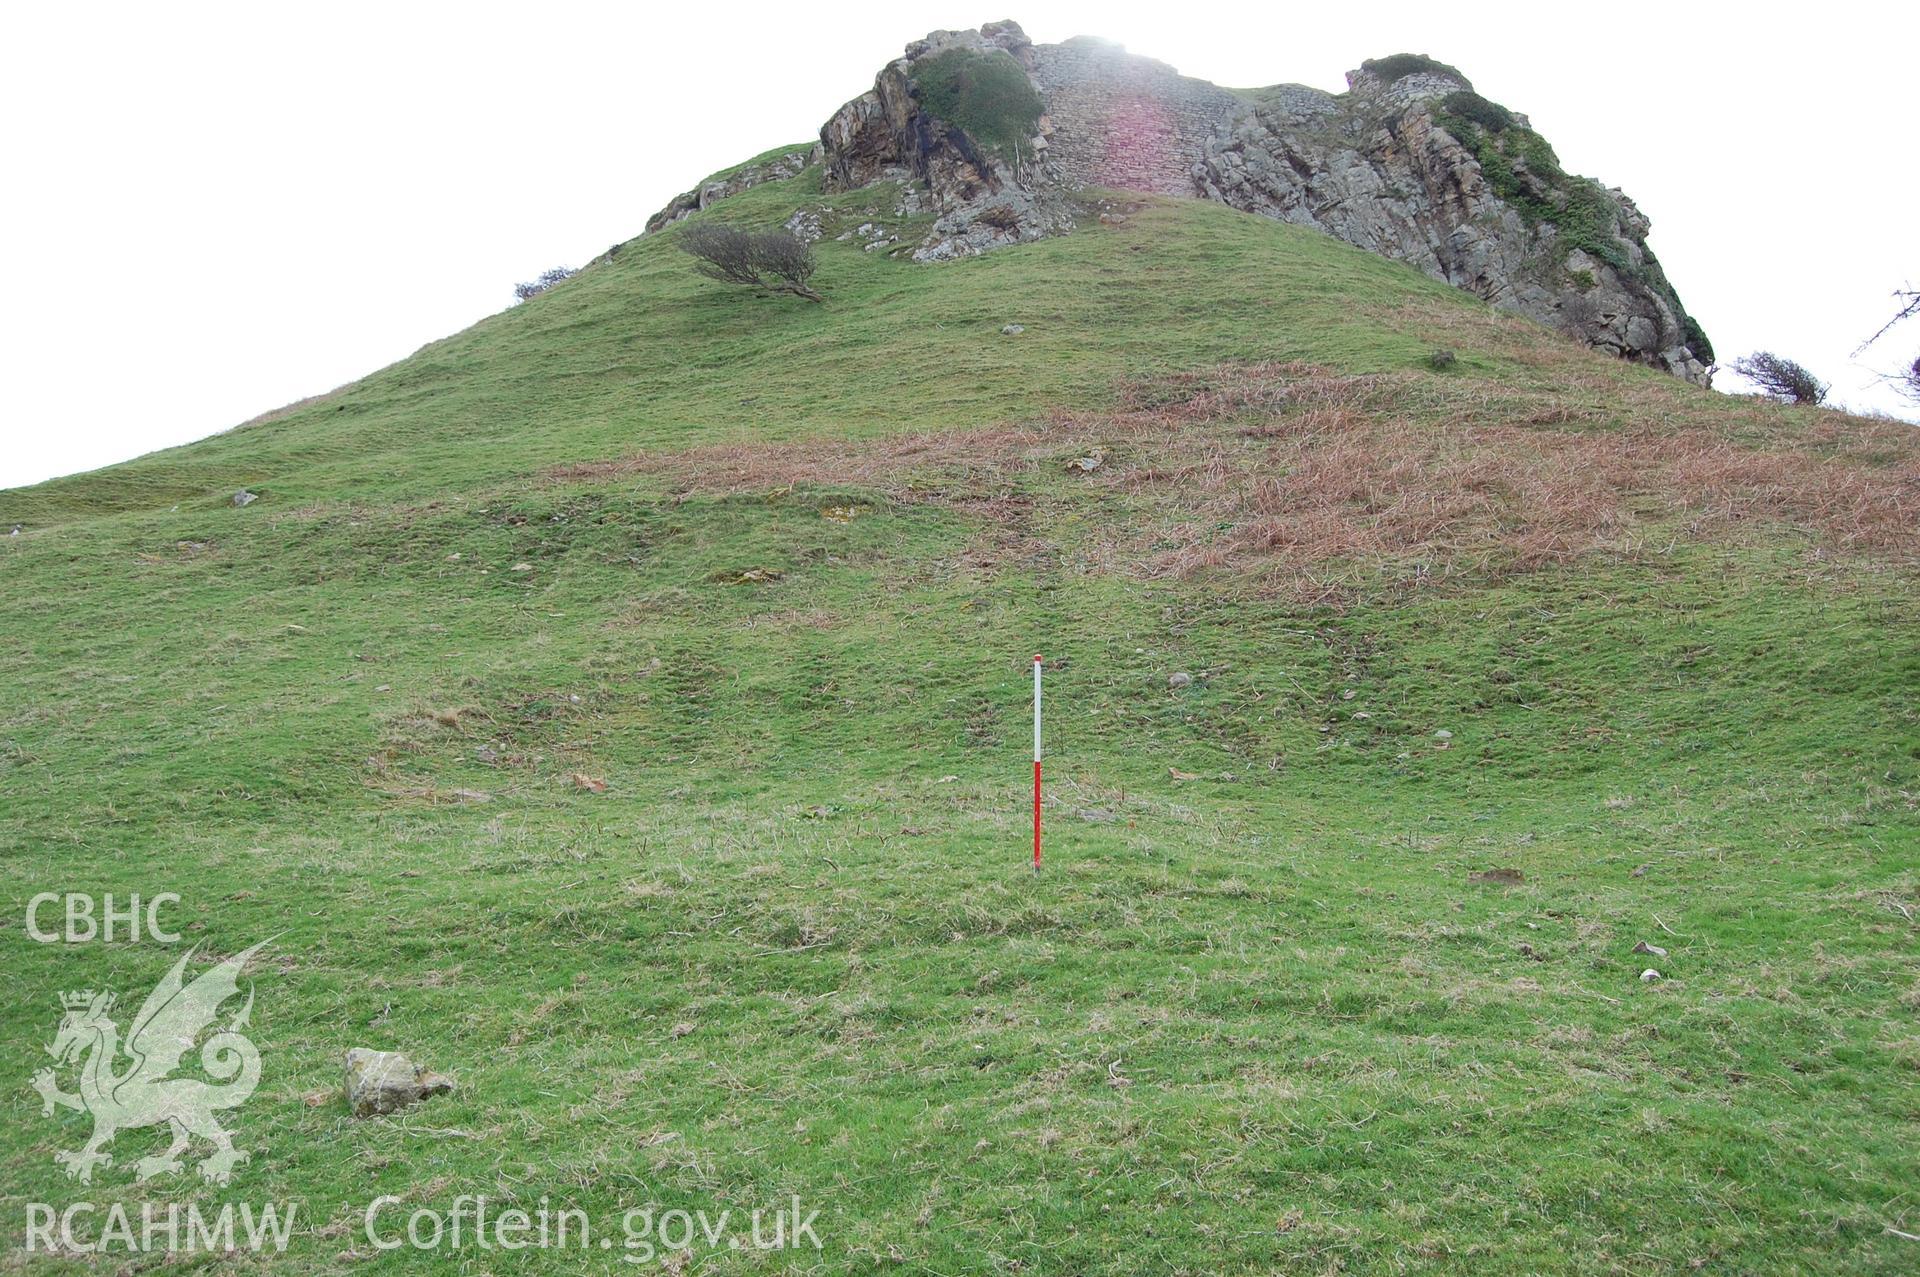 Digital photograph from an archaeological assessment of Deganwy Castle, carried out by Gwynedd Archaeological Trust, 2009. House platform.